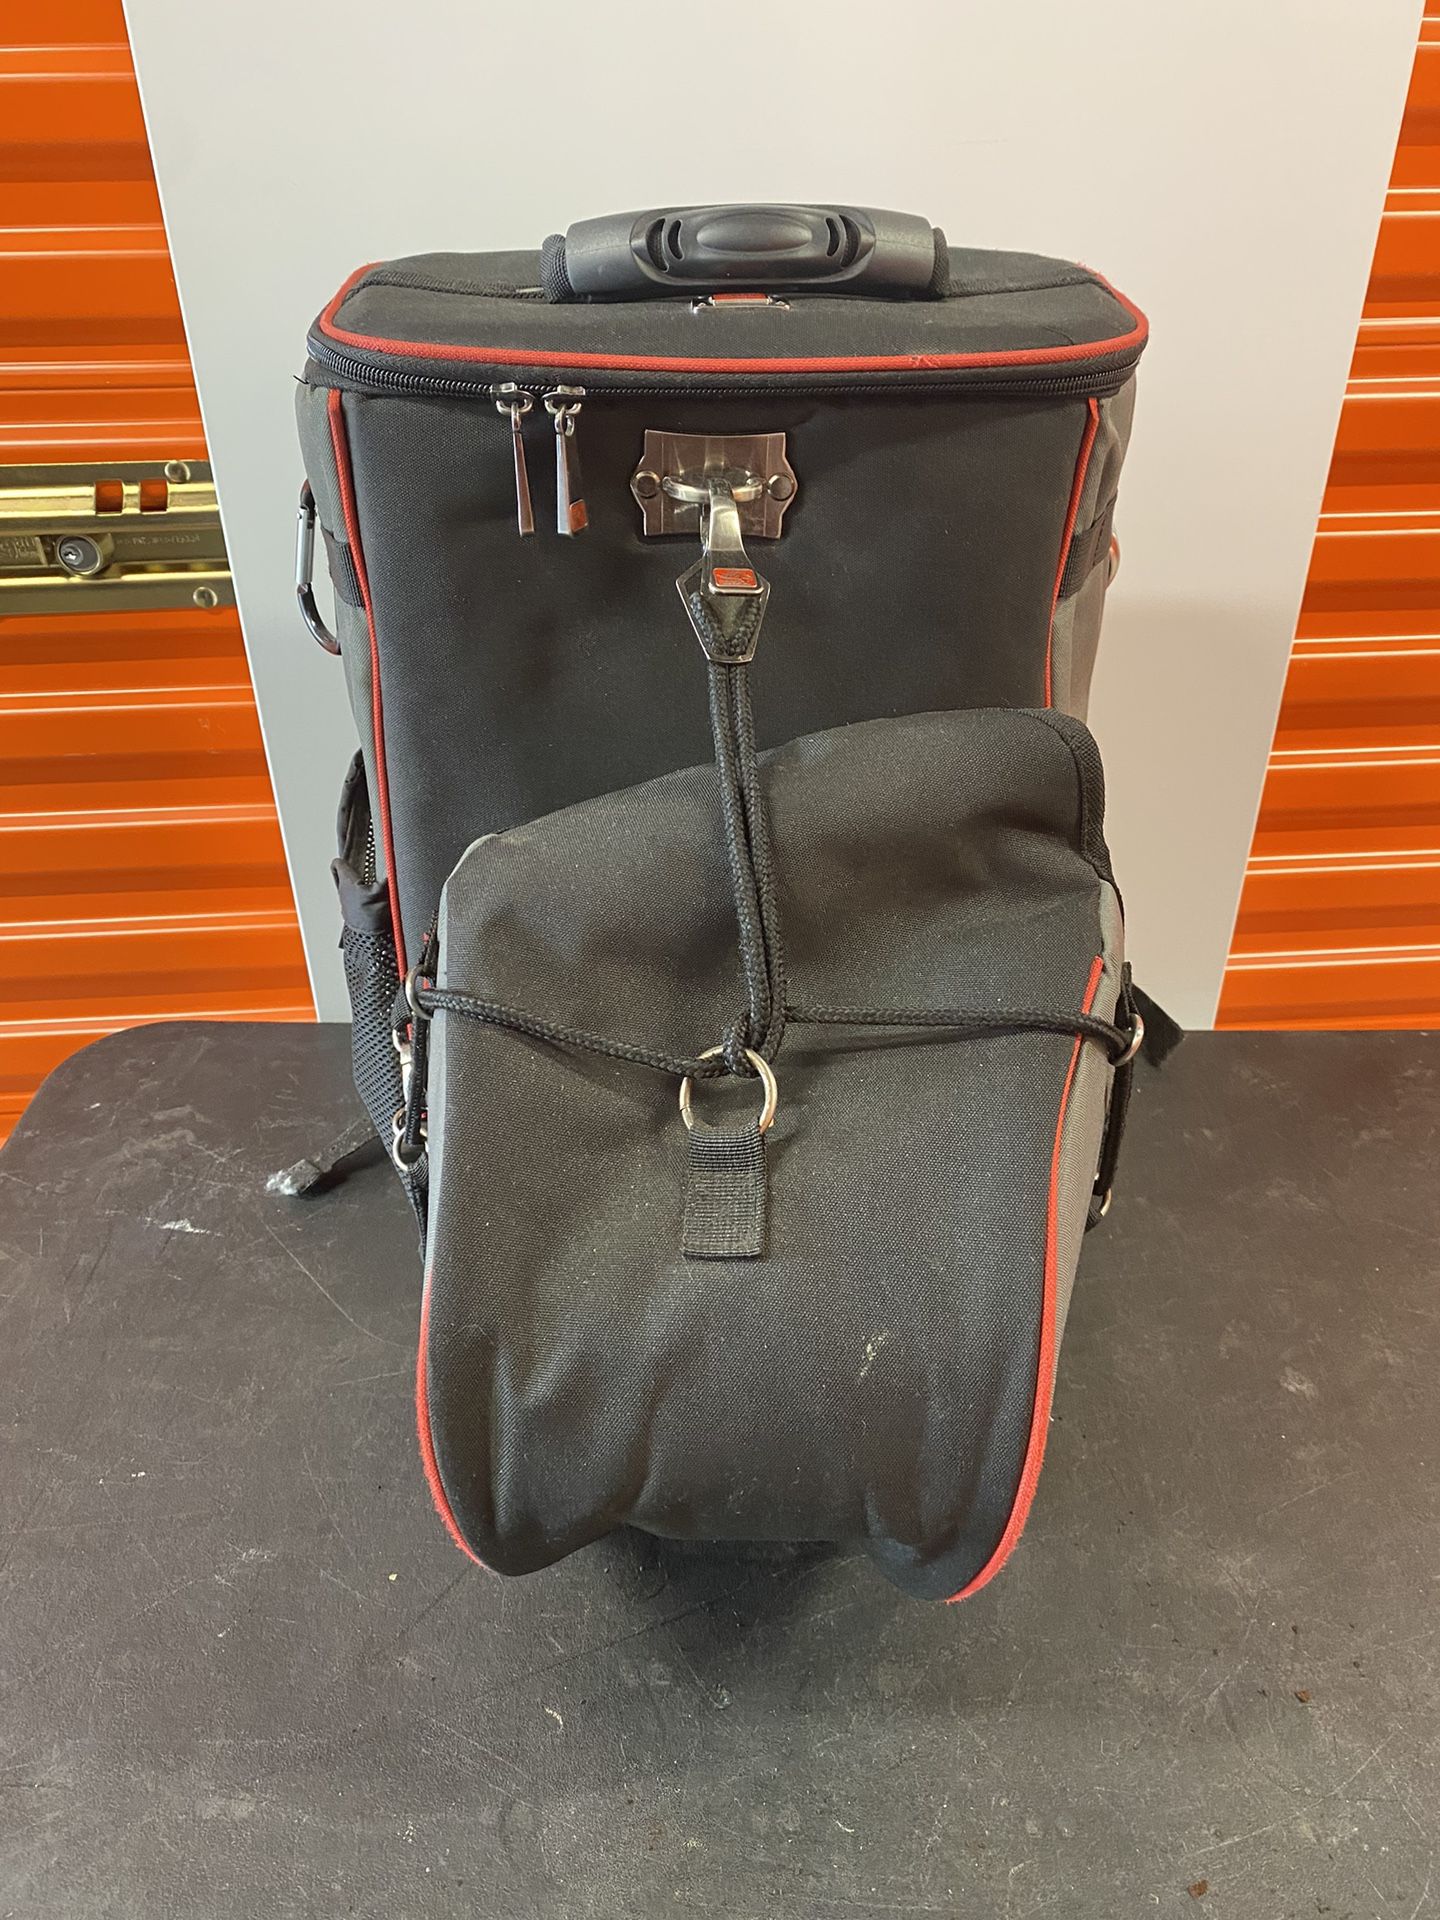 Revco Black Stallion BSX Extreme Welders Gearpack GB100 * PRICE IS FIRM * ADDRESS IS LISTED